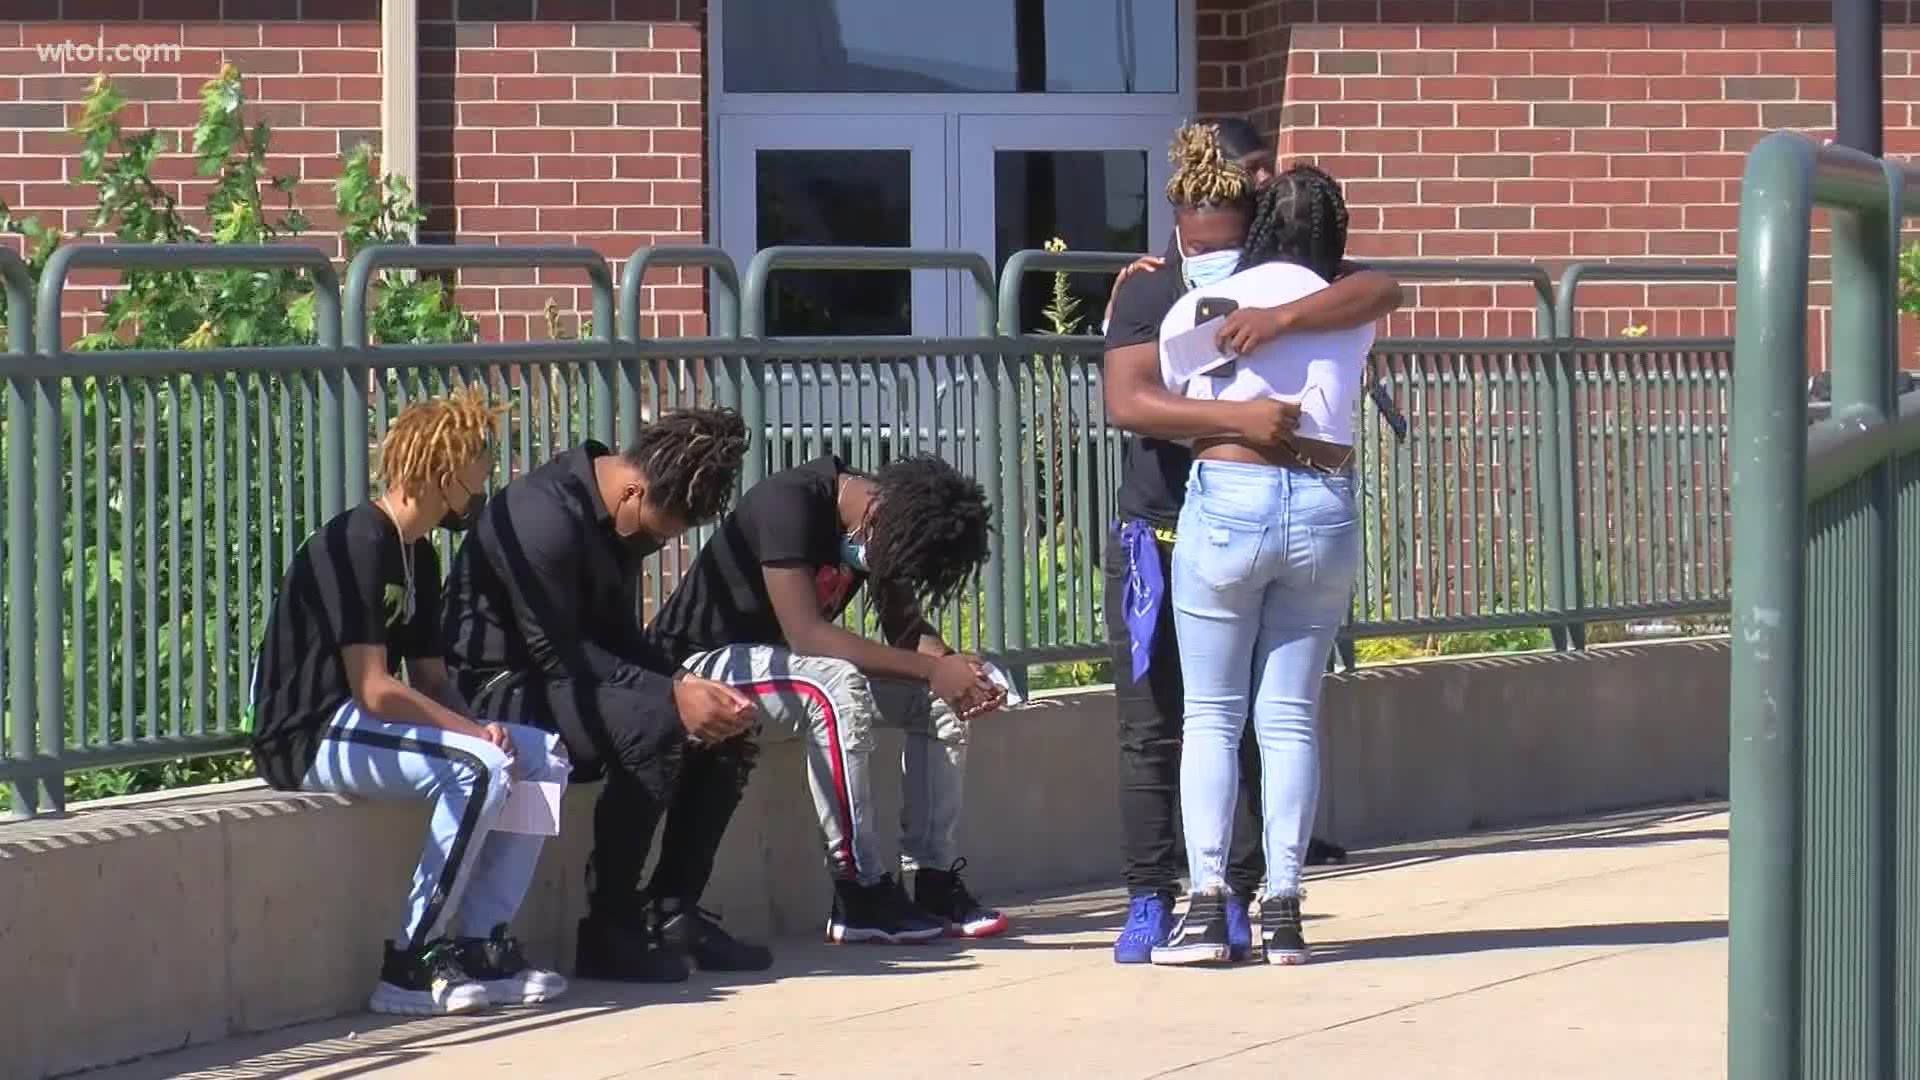 The walk-through service happened at Start High School where the 17-year-old went to school and played basketball.